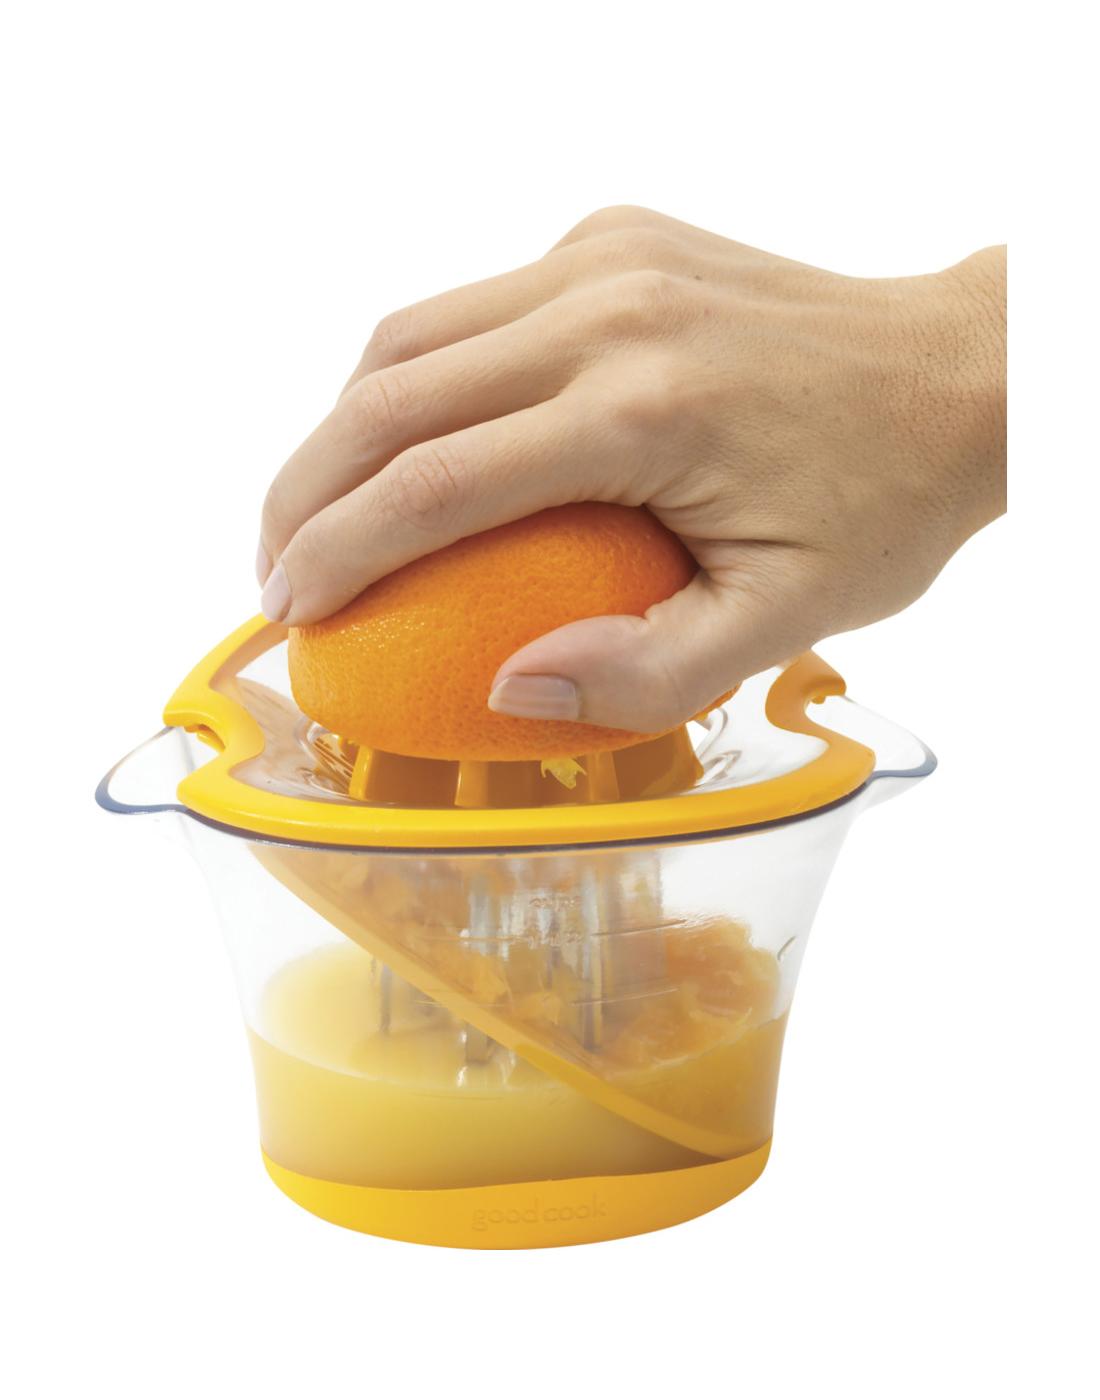 GoodCook Touch 2-in-1 Citrus Juicer; image 4 of 5